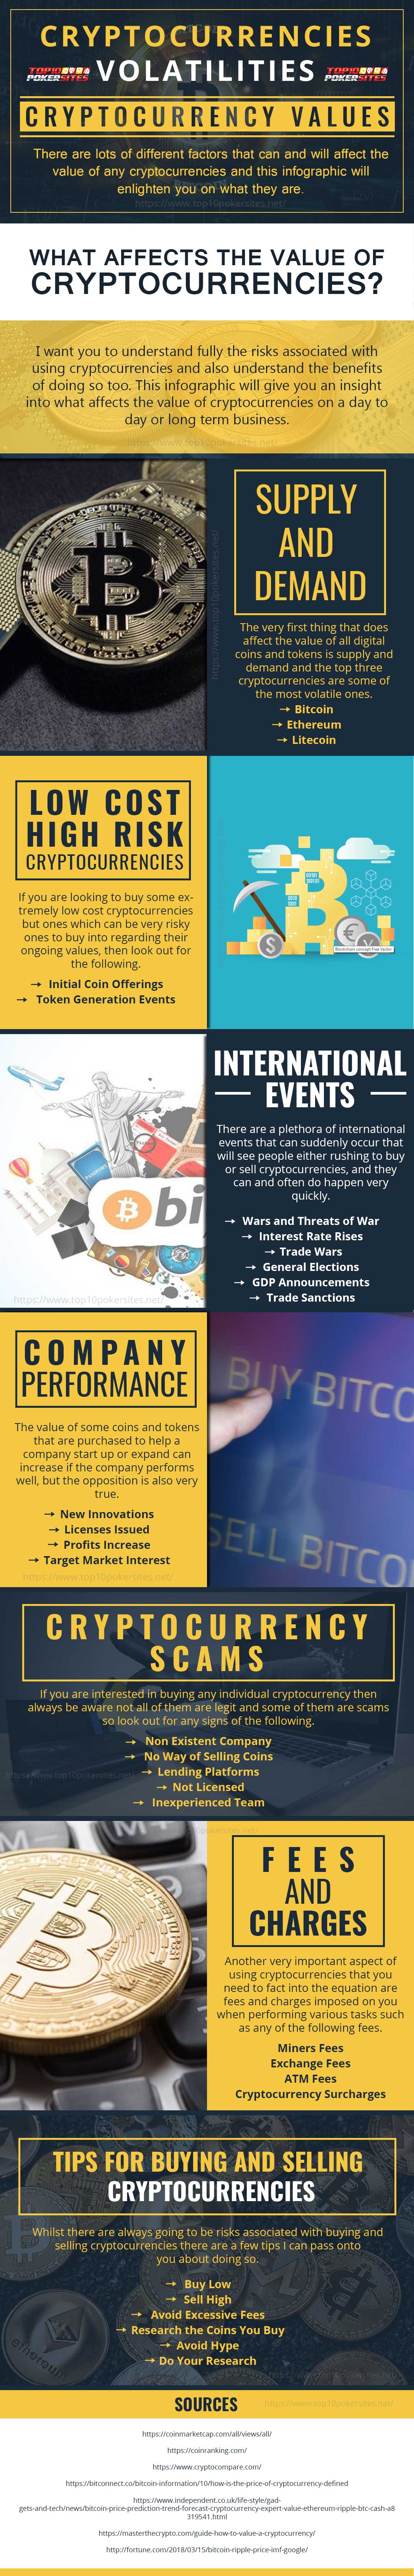 Infographic on What Affects the Value of Cryptocurrencies?